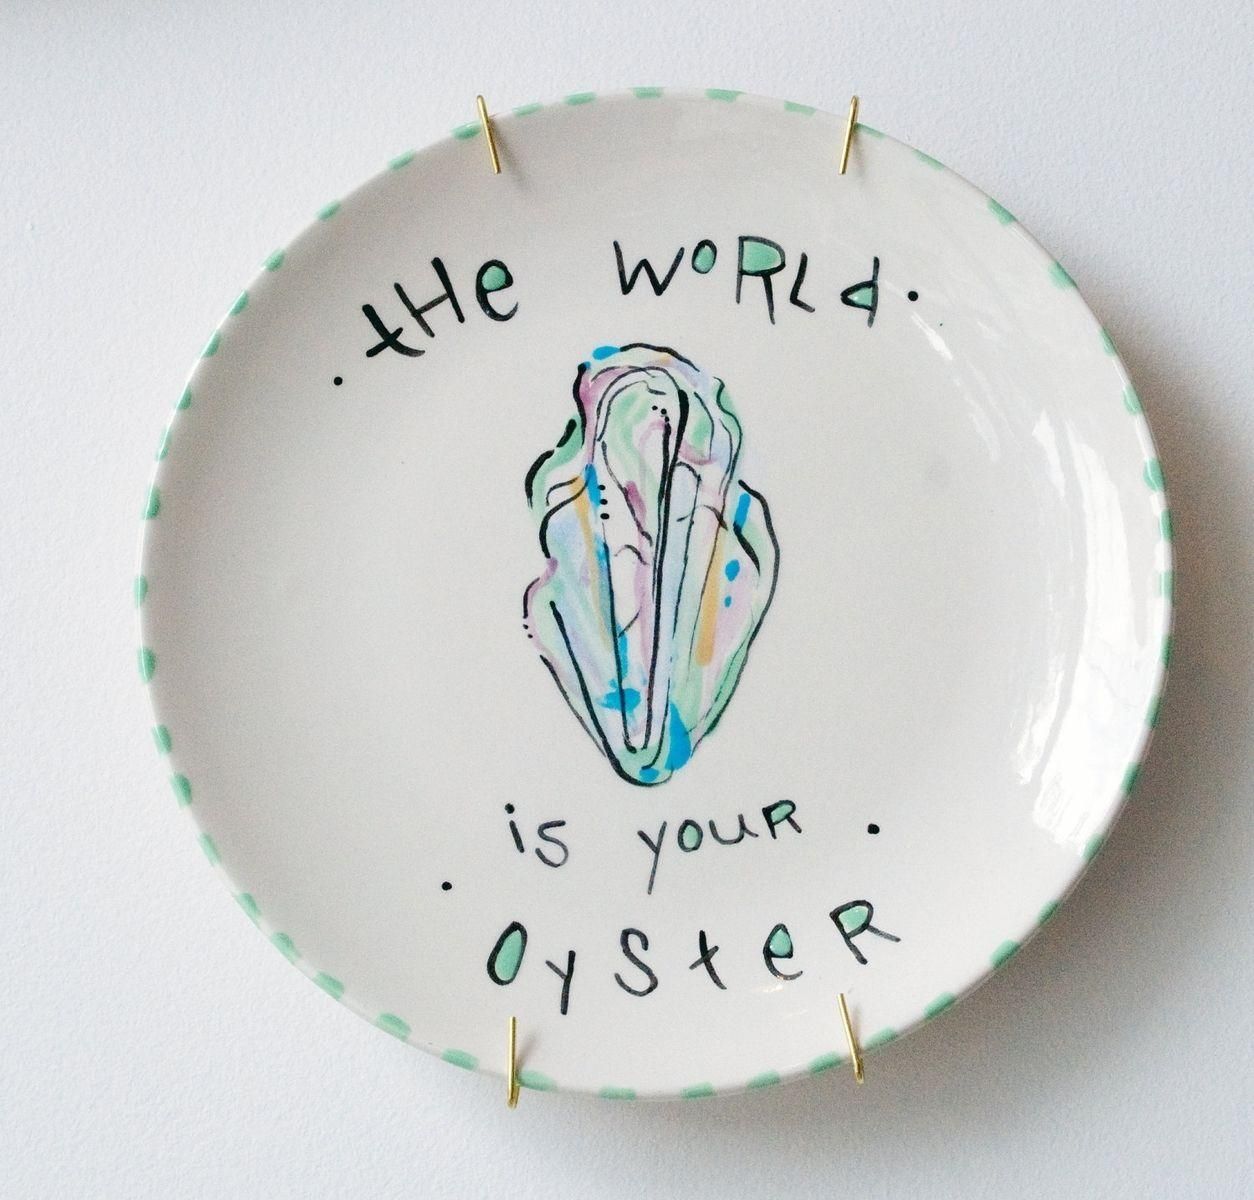 Hand Made The World Is Your Oyster – Decorative Plate – Wall Art In Decorative Plates For Wall Art (View 20 of 20)